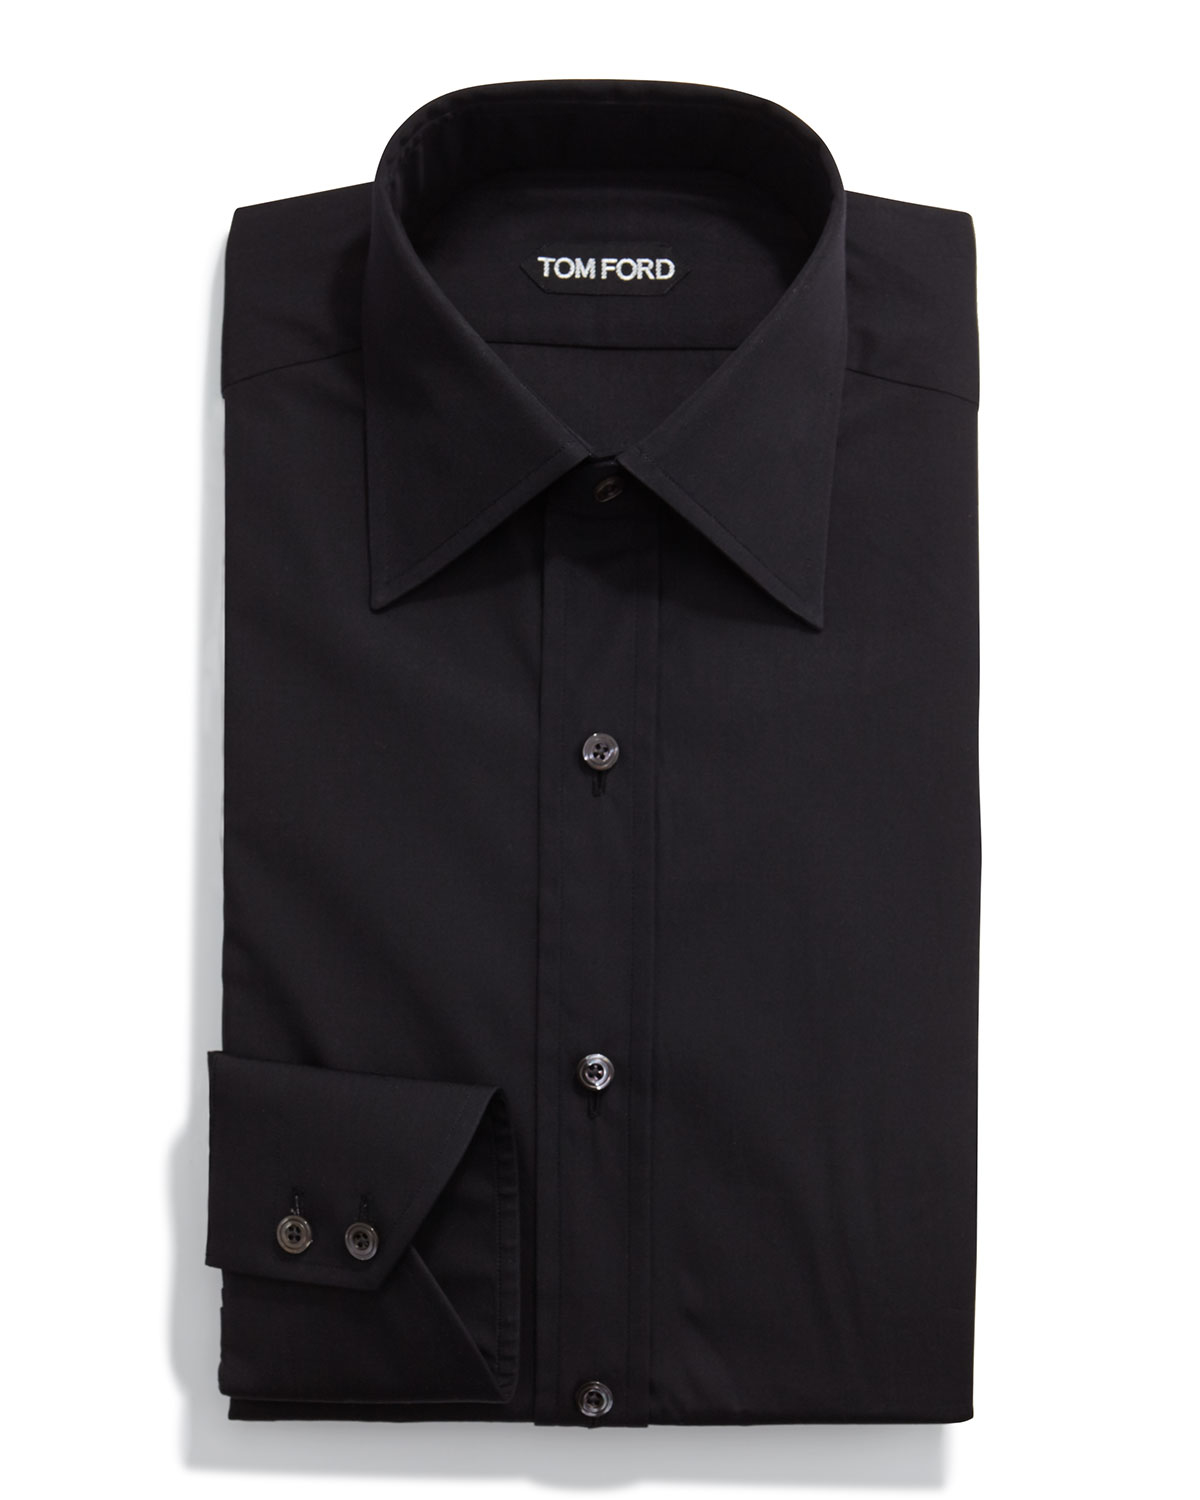 Lyst - Tom Ford Classic Solid Dress Shirt in Black for Men